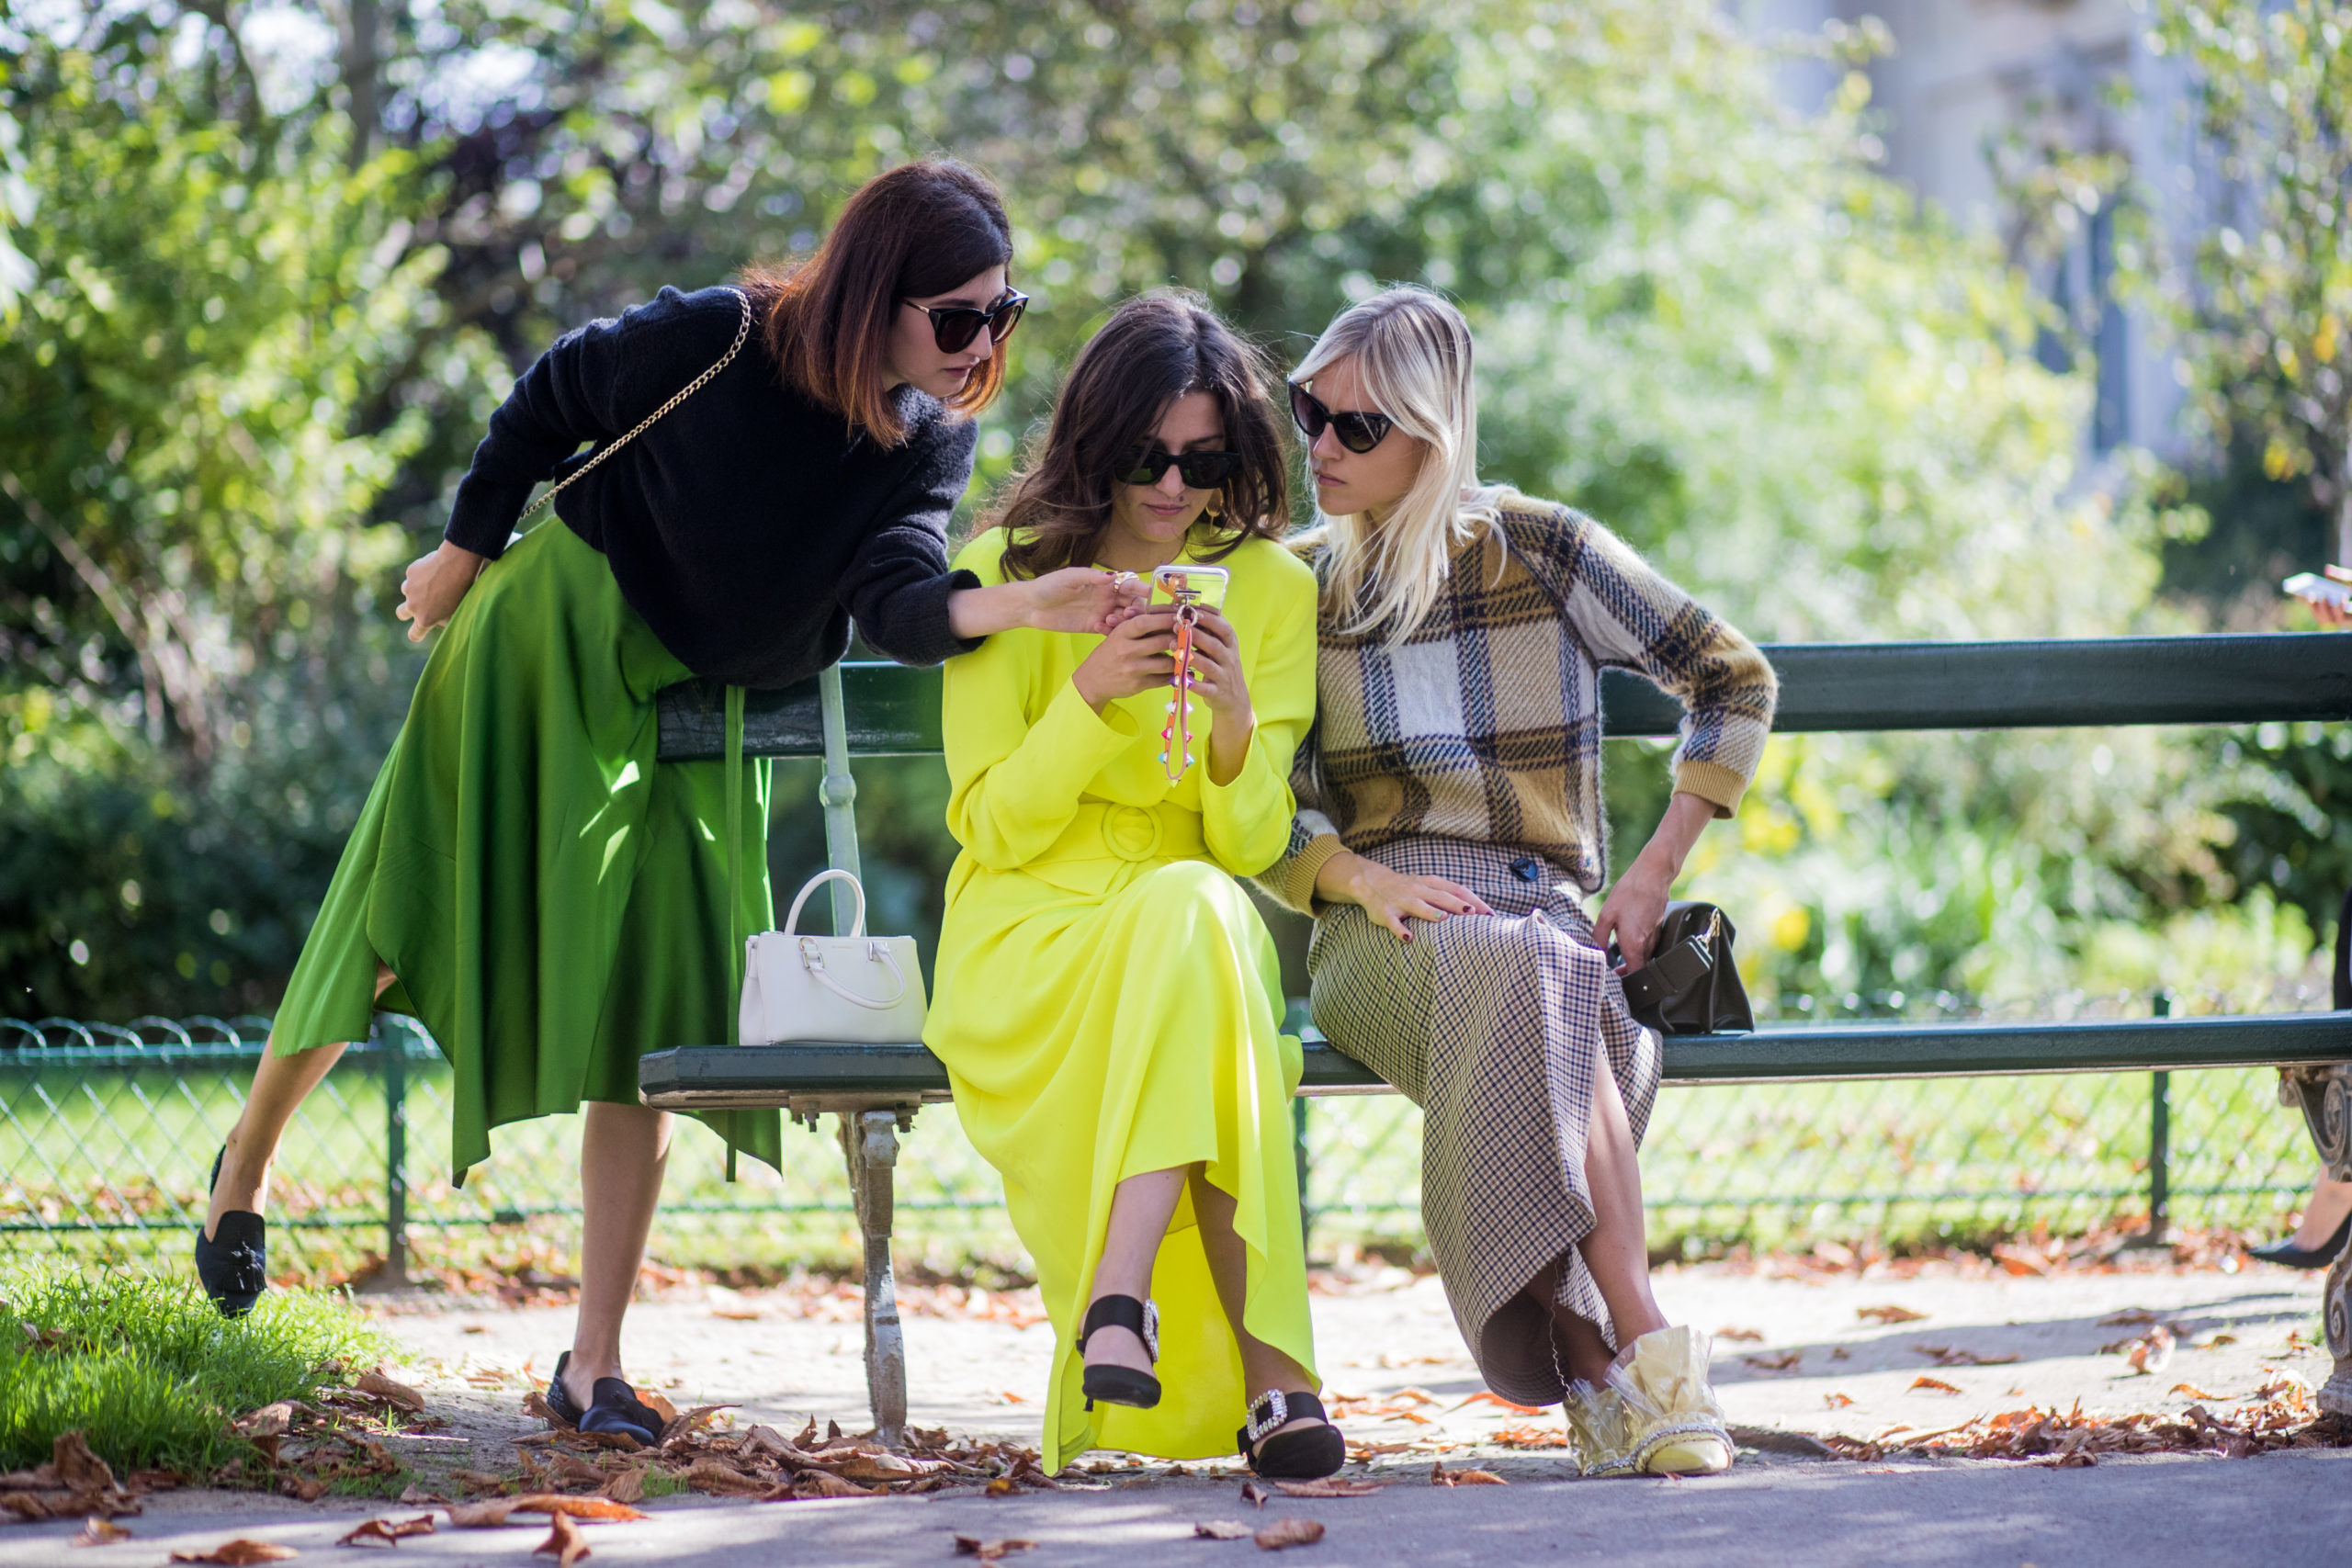 PARIS, FRANCE - SEPTEMBER 29: Valentina Siragusa and Eleonora Carisi wearing neon dress and Linda Tol sitting on a bench looking at a mobile phone seen outside Issey Miyake during Paris Fashion Week Spring/Summer 2018 on September 29, 2017 in Paris, France. (Photo by Christian Vierig/Getty Images)